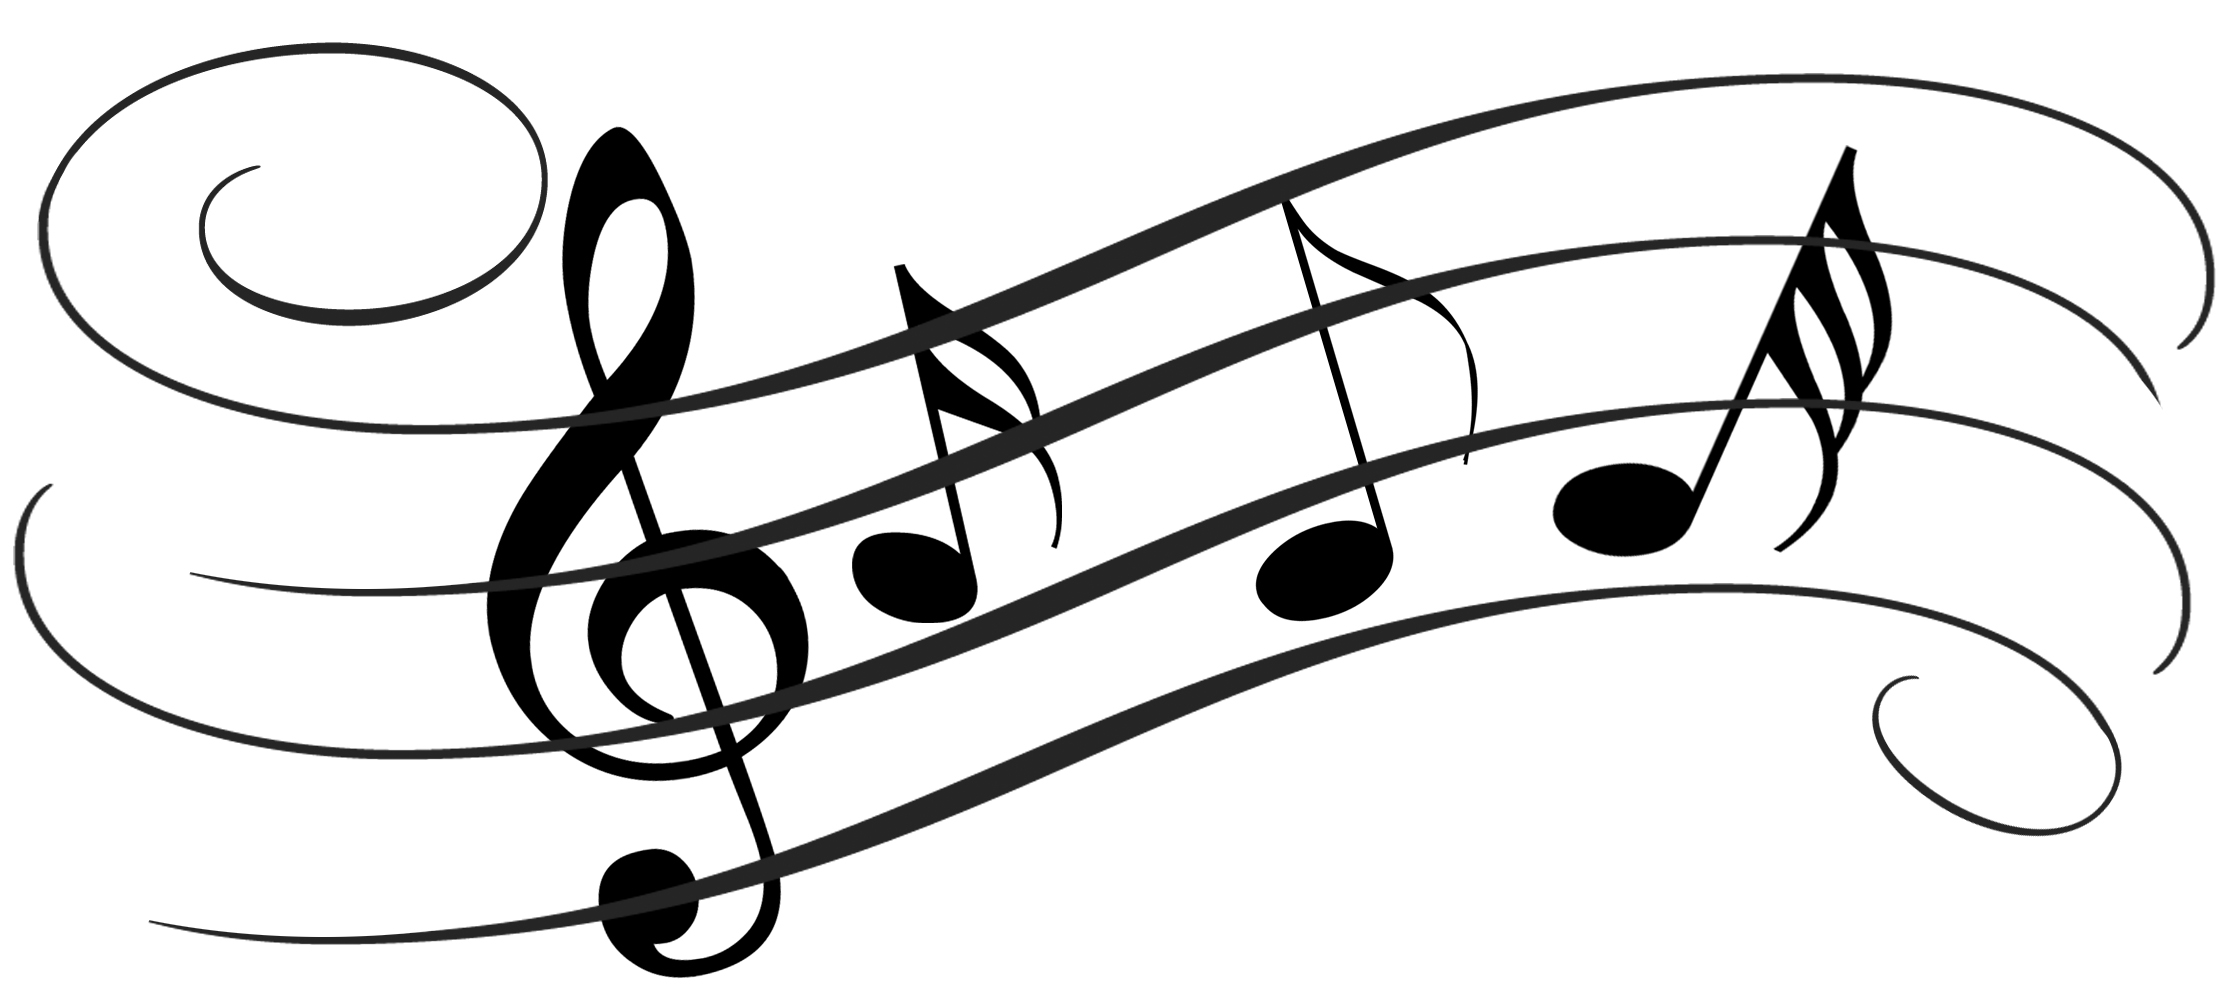 music instruments clipart black and white - photo #6